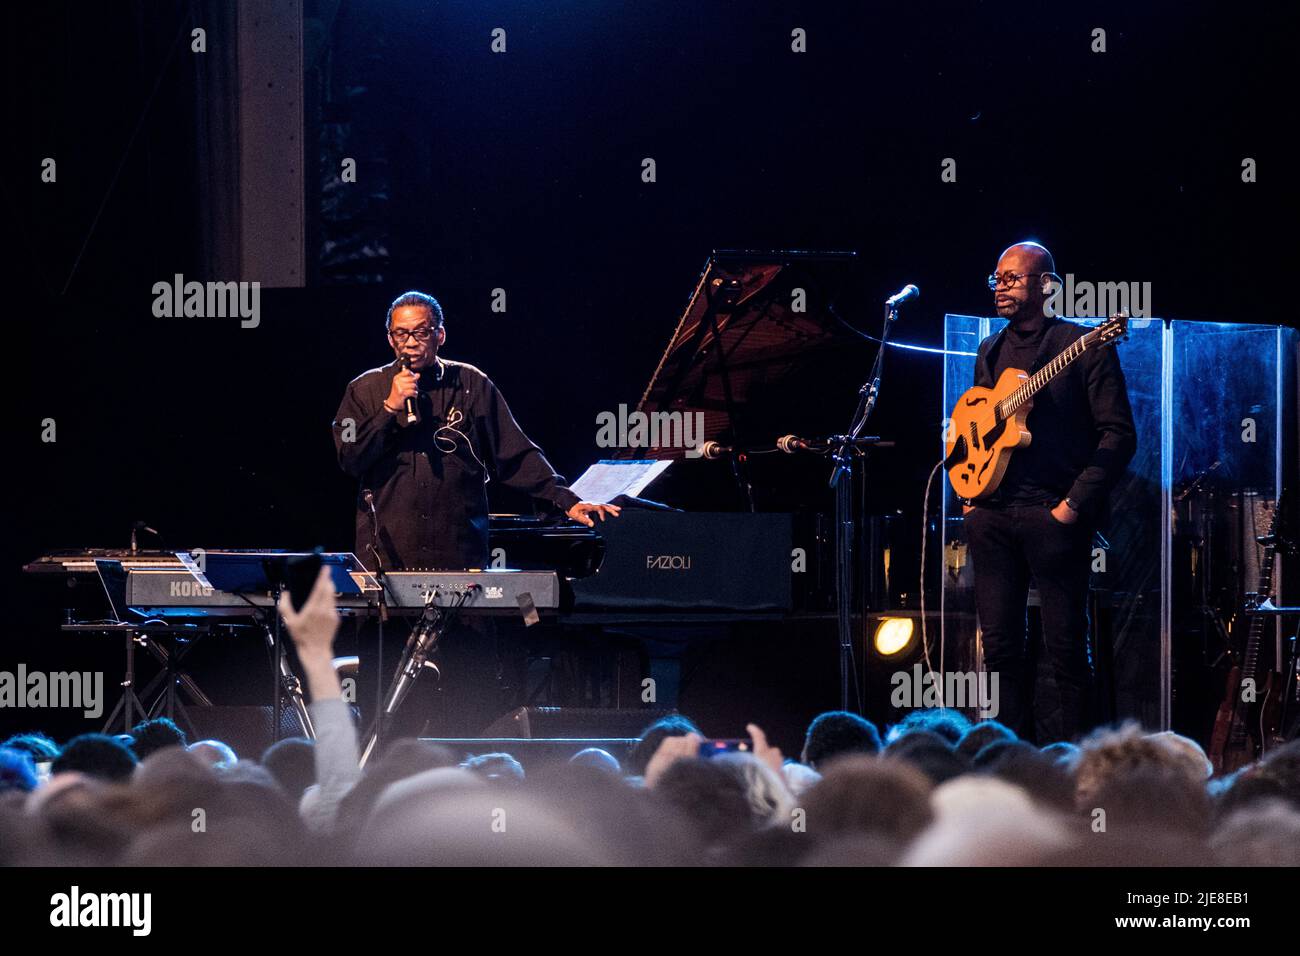 Herbie Hancock performs on the stage during his concert at Puteaux Parvis de la Défense, in France, on June 25, 2022. American jazz pianist, modern music icon, Herbie Hancock has transcended limits and genres while maintaining his unmistakable voice. After more than sixty years of career and fourteen Grammy Awards, including album of the year for River: The Joni Letters, he continues to amaze audiences around the world. Herbie Hancock : piano, Terence Blanchard: trumpet, James Genus: bass, Lionel Loueke: guitar, Justin Tyson : drums. Photo by Pierrick Villette/ABACAPRESS.COM Stock Photo